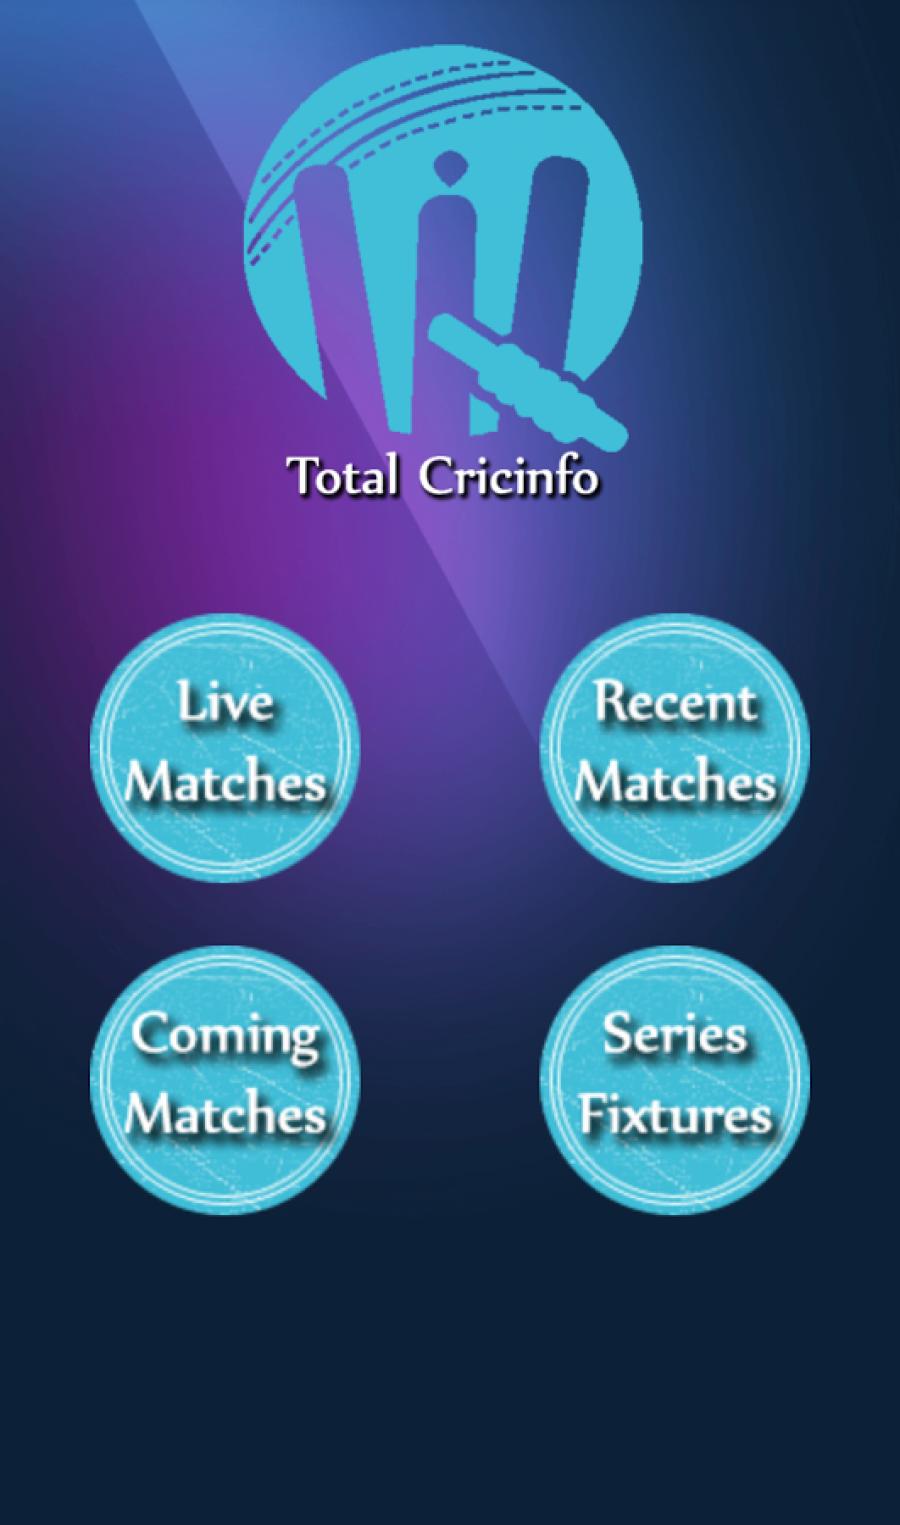 Live Cricket Scores and Updates - Total Cricinfo Android Game APK (com.totalcricinfo.pc.myapplication) by Total Cricinfo